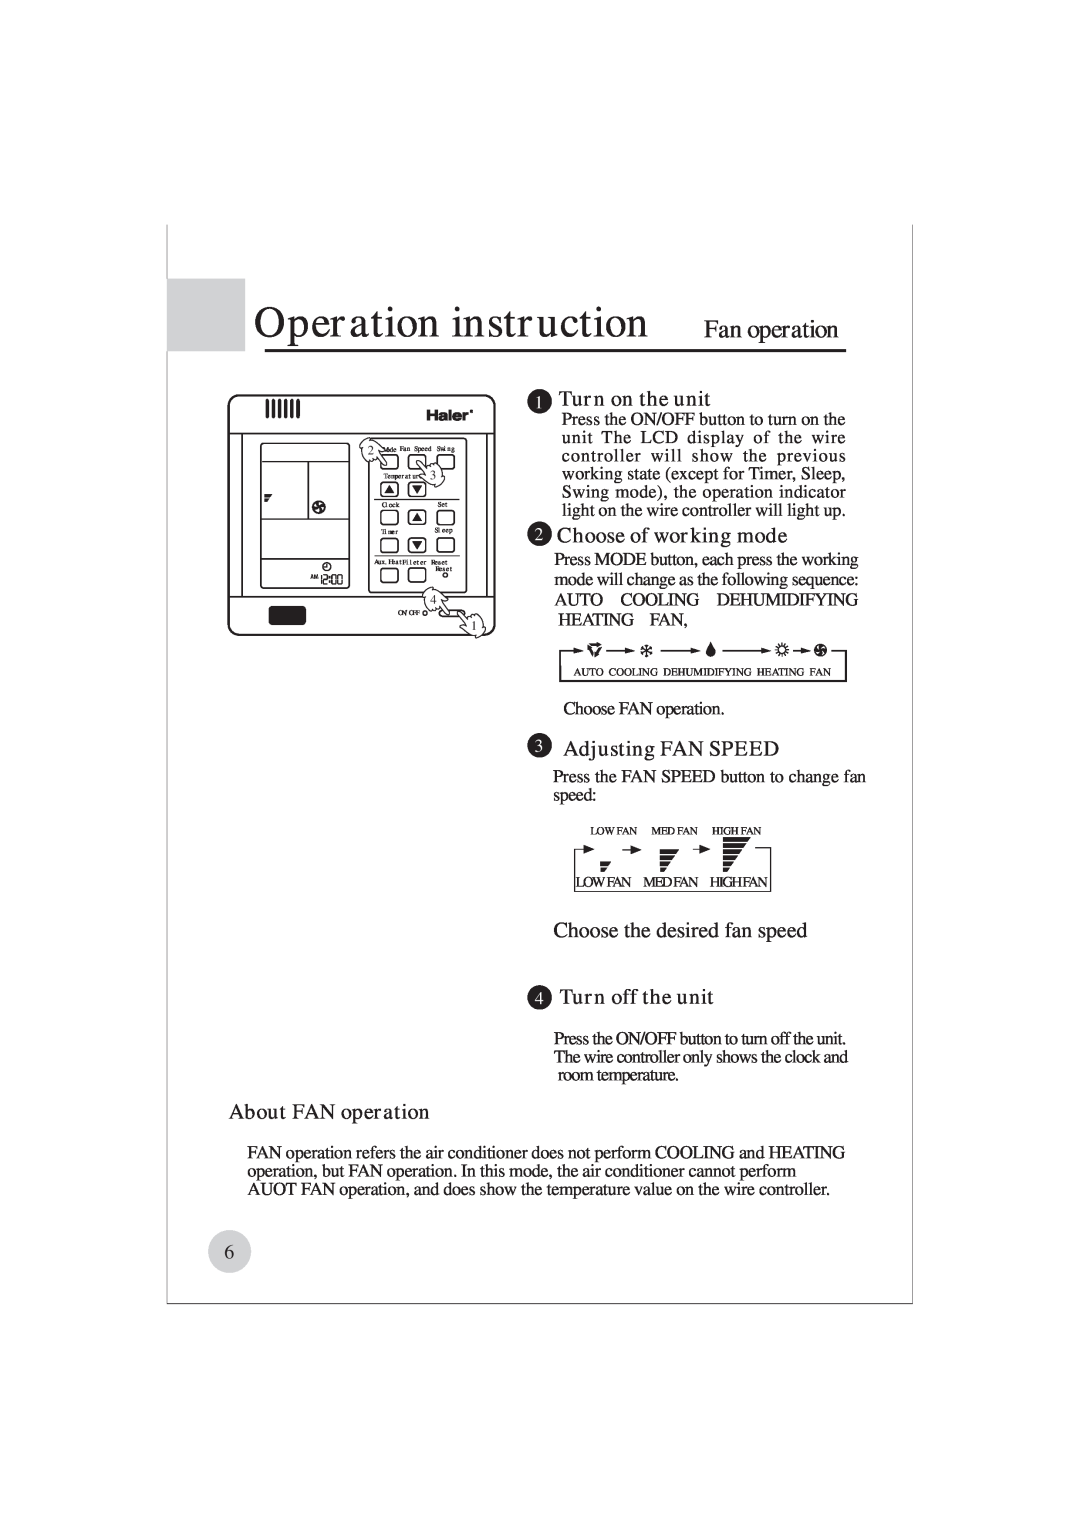 Haier AE122BCAAA (H2EM-18H03) manual Operation instruction Fan operation, 1Turn on the unit, 2Choose of working mode 